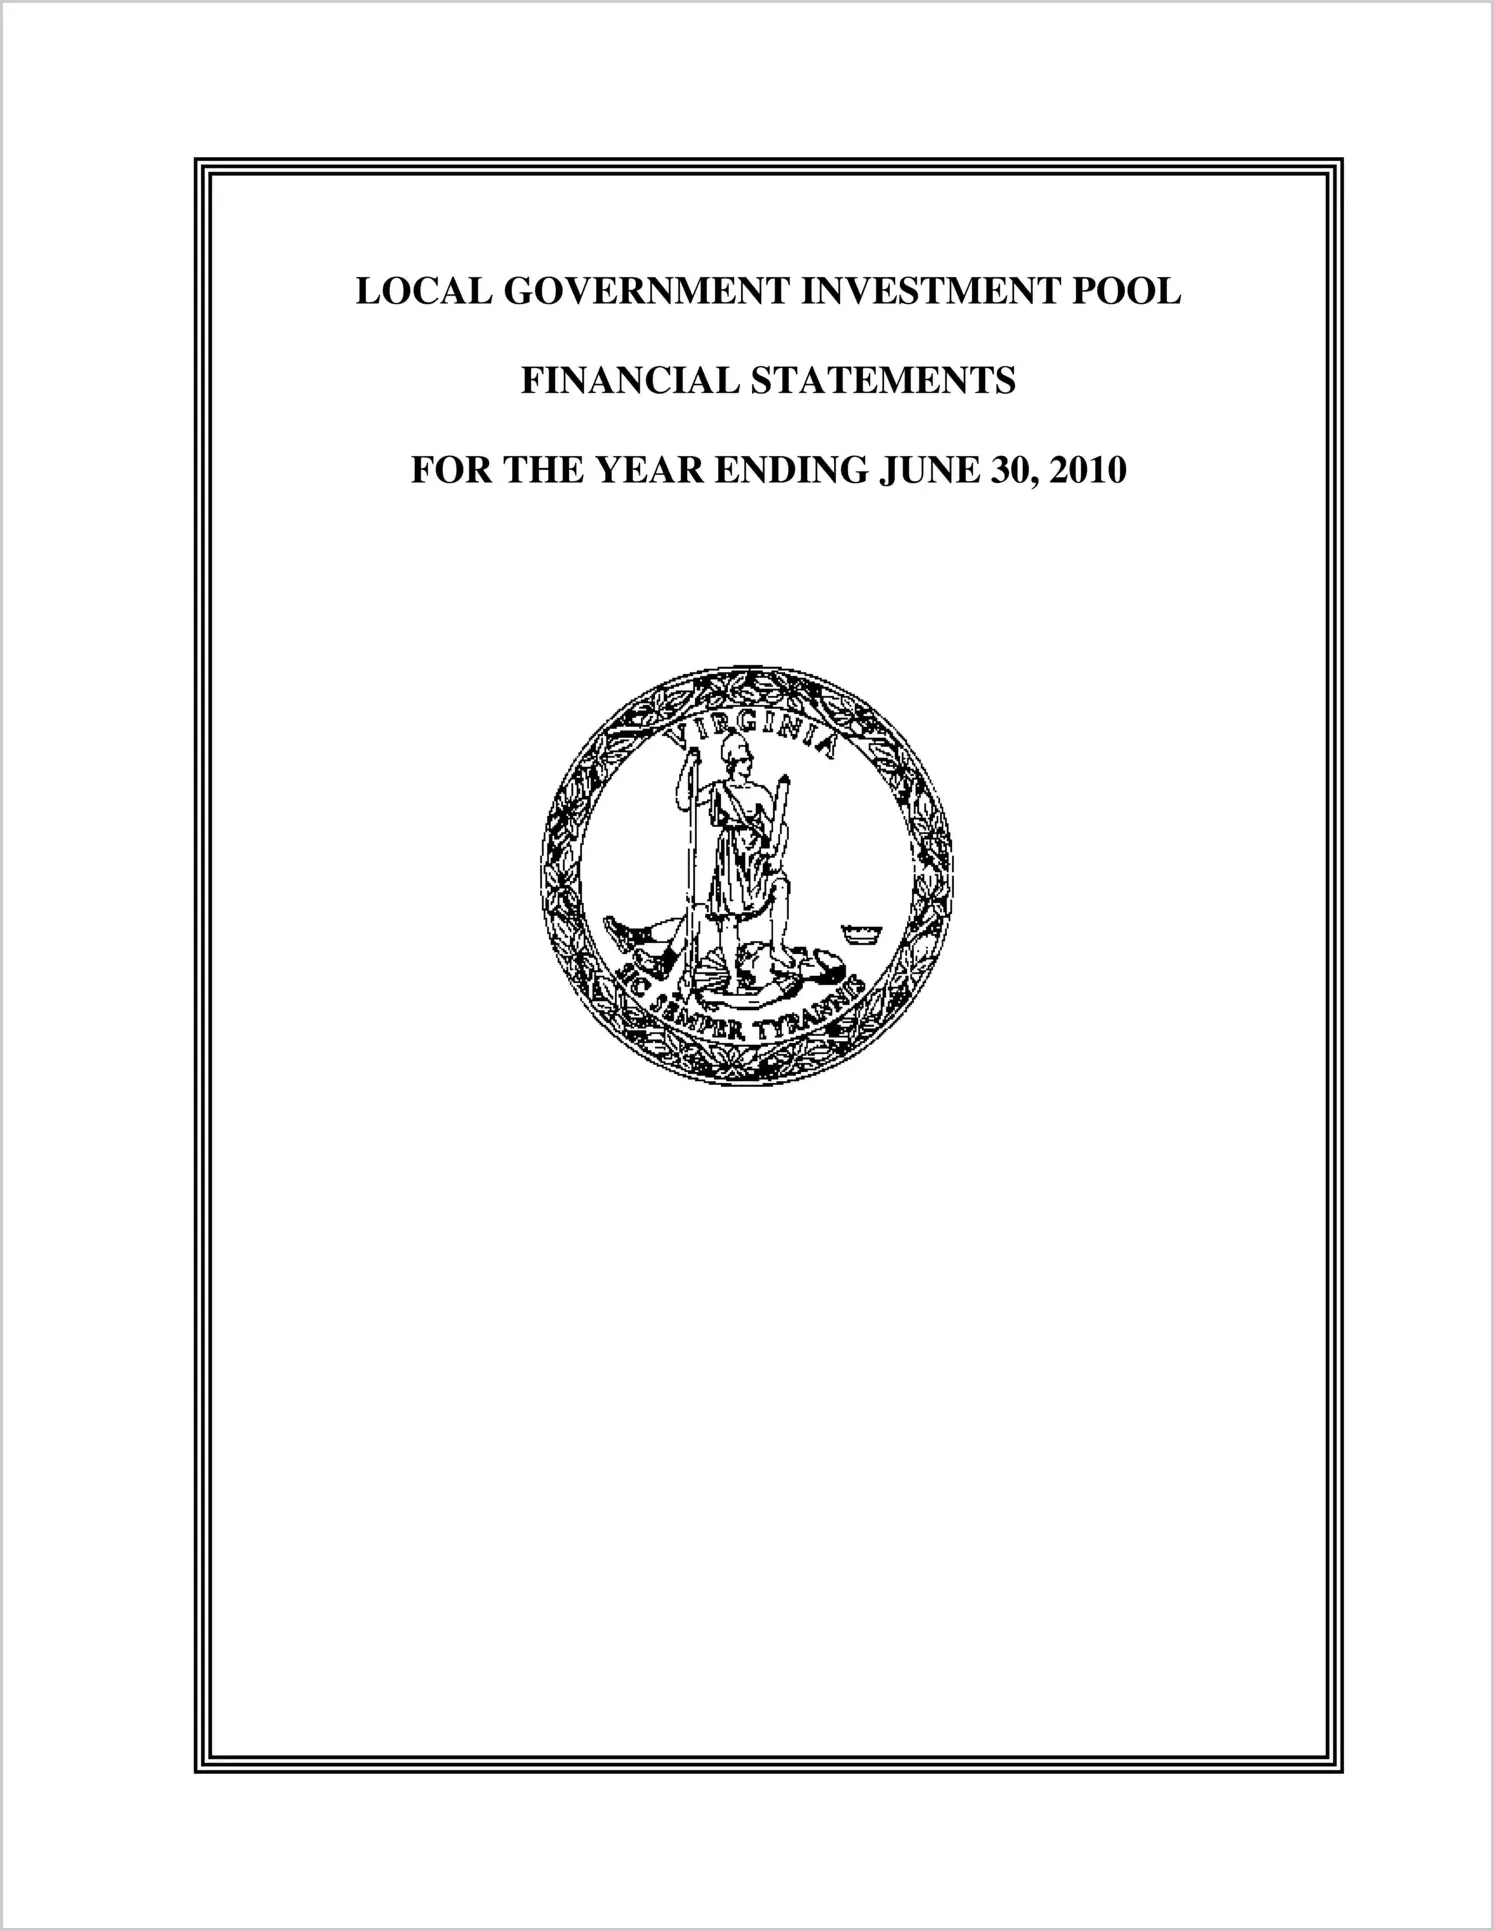 Local Government Investment Pool Financial Statements for the year ended June 30, 2010